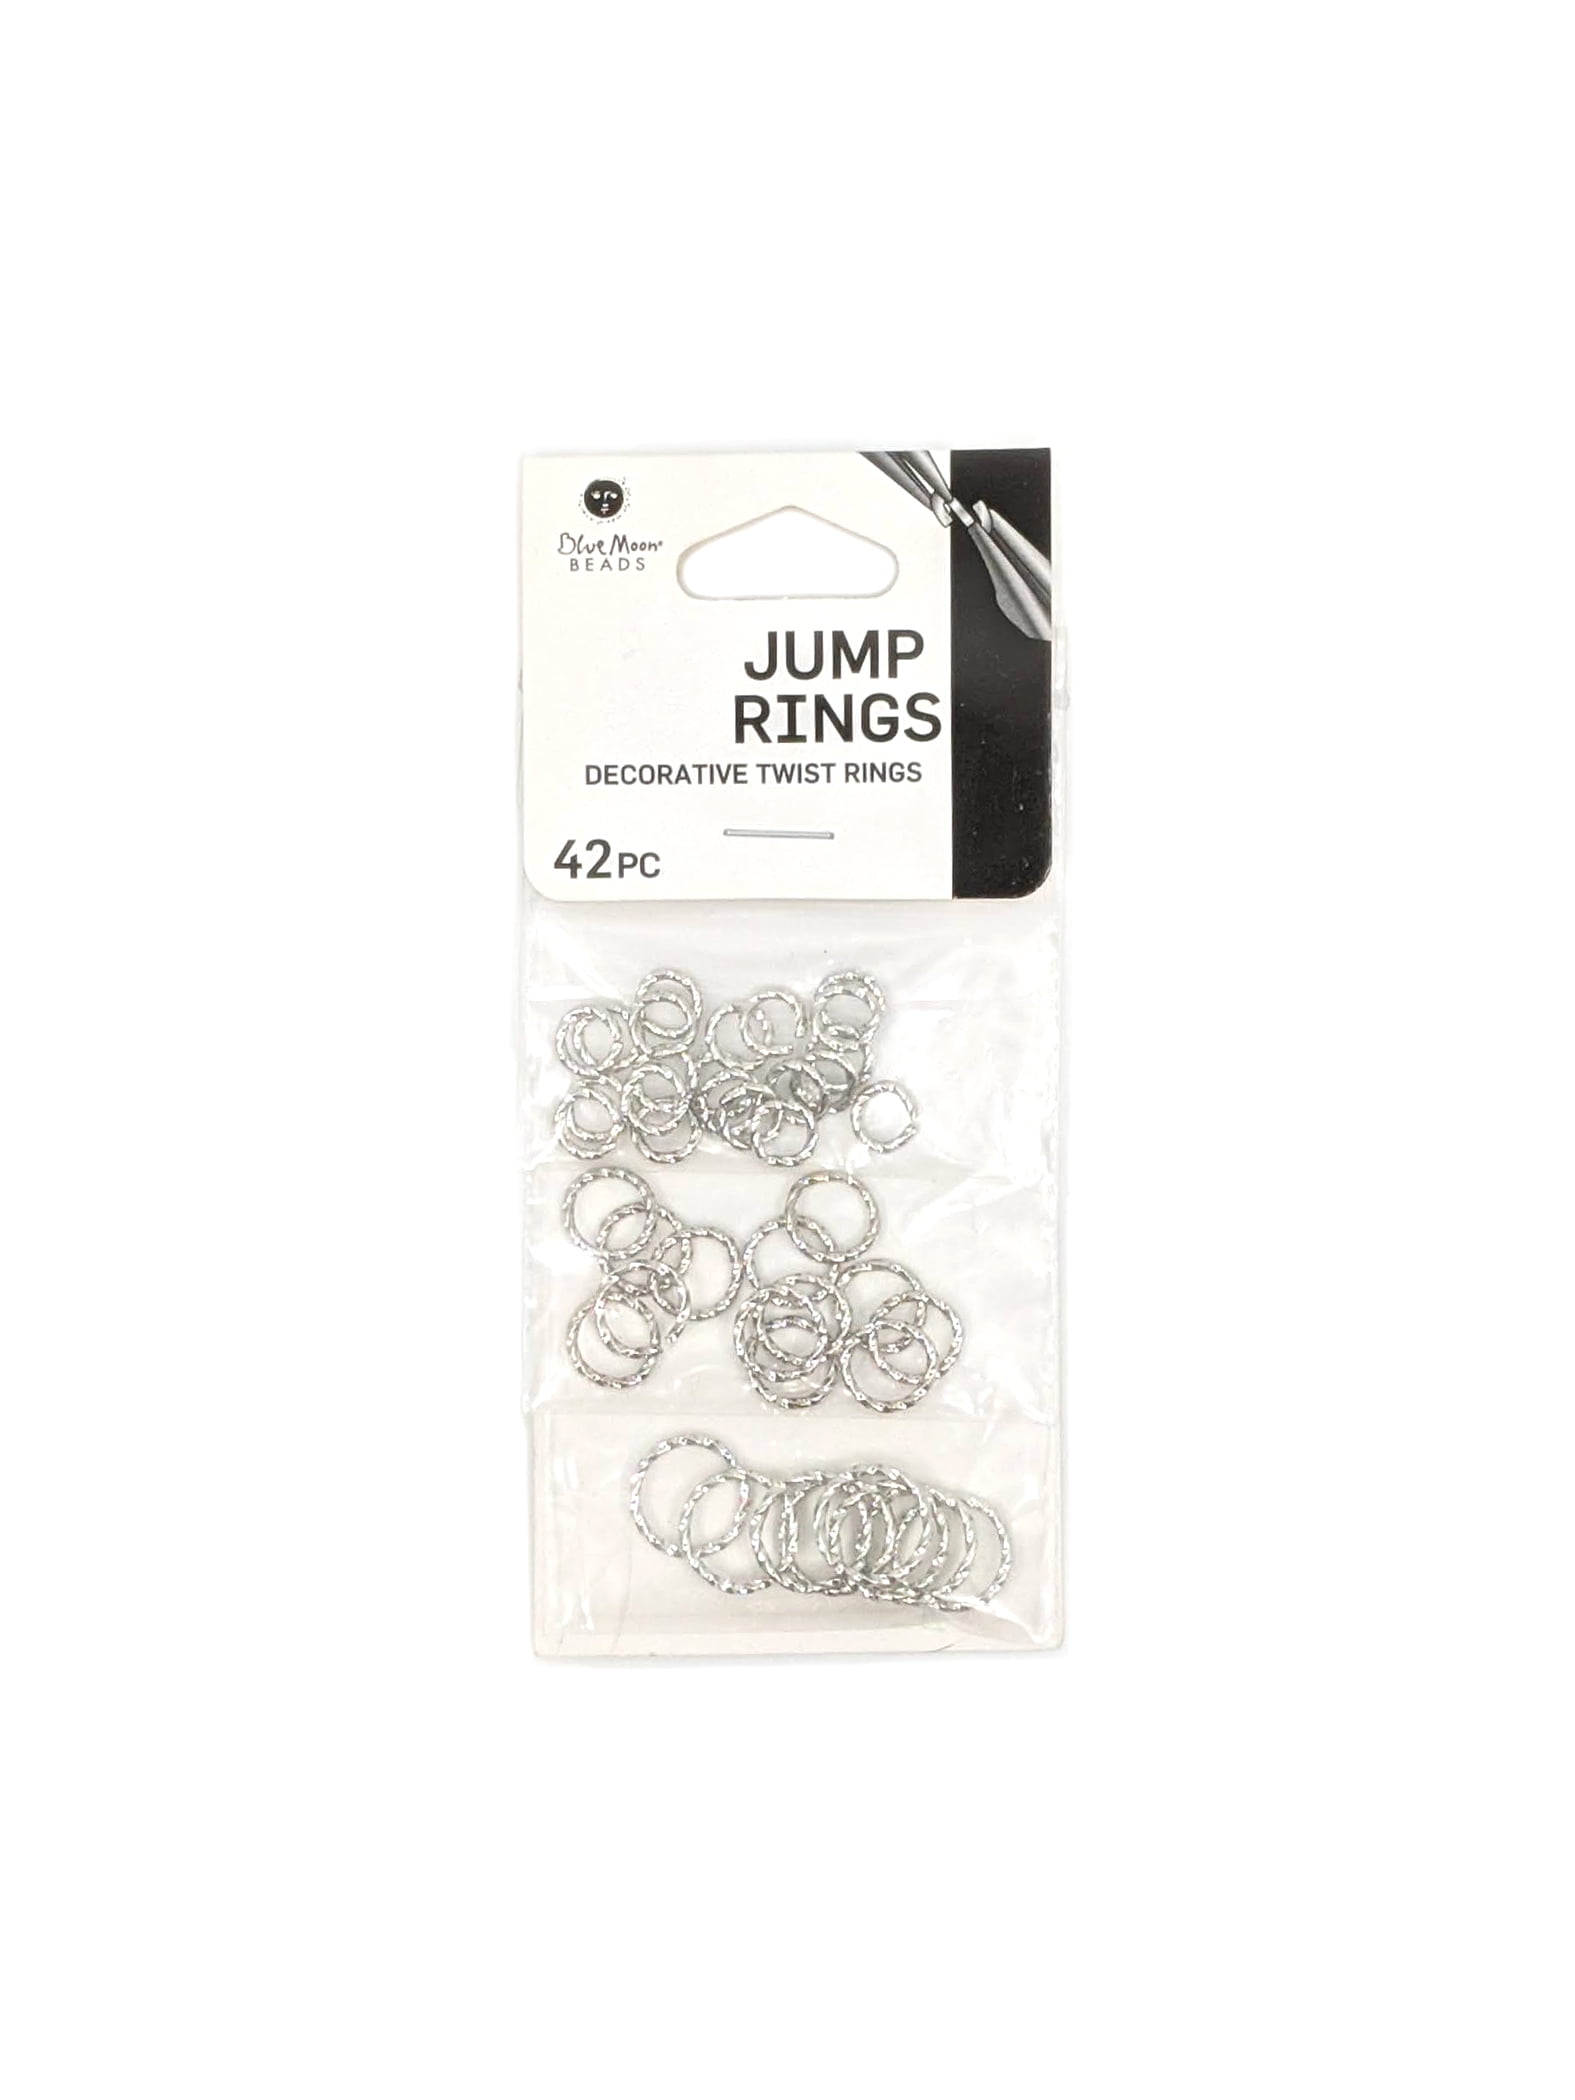  LUNARM 880pcs Open Jump Rings with Lobster Clasps and Tweezers,  4 Sizes Jump Rings Jewelry Findings Kit for Jewelry Repair Keychains and  Necklace Making (Silver and Gold)